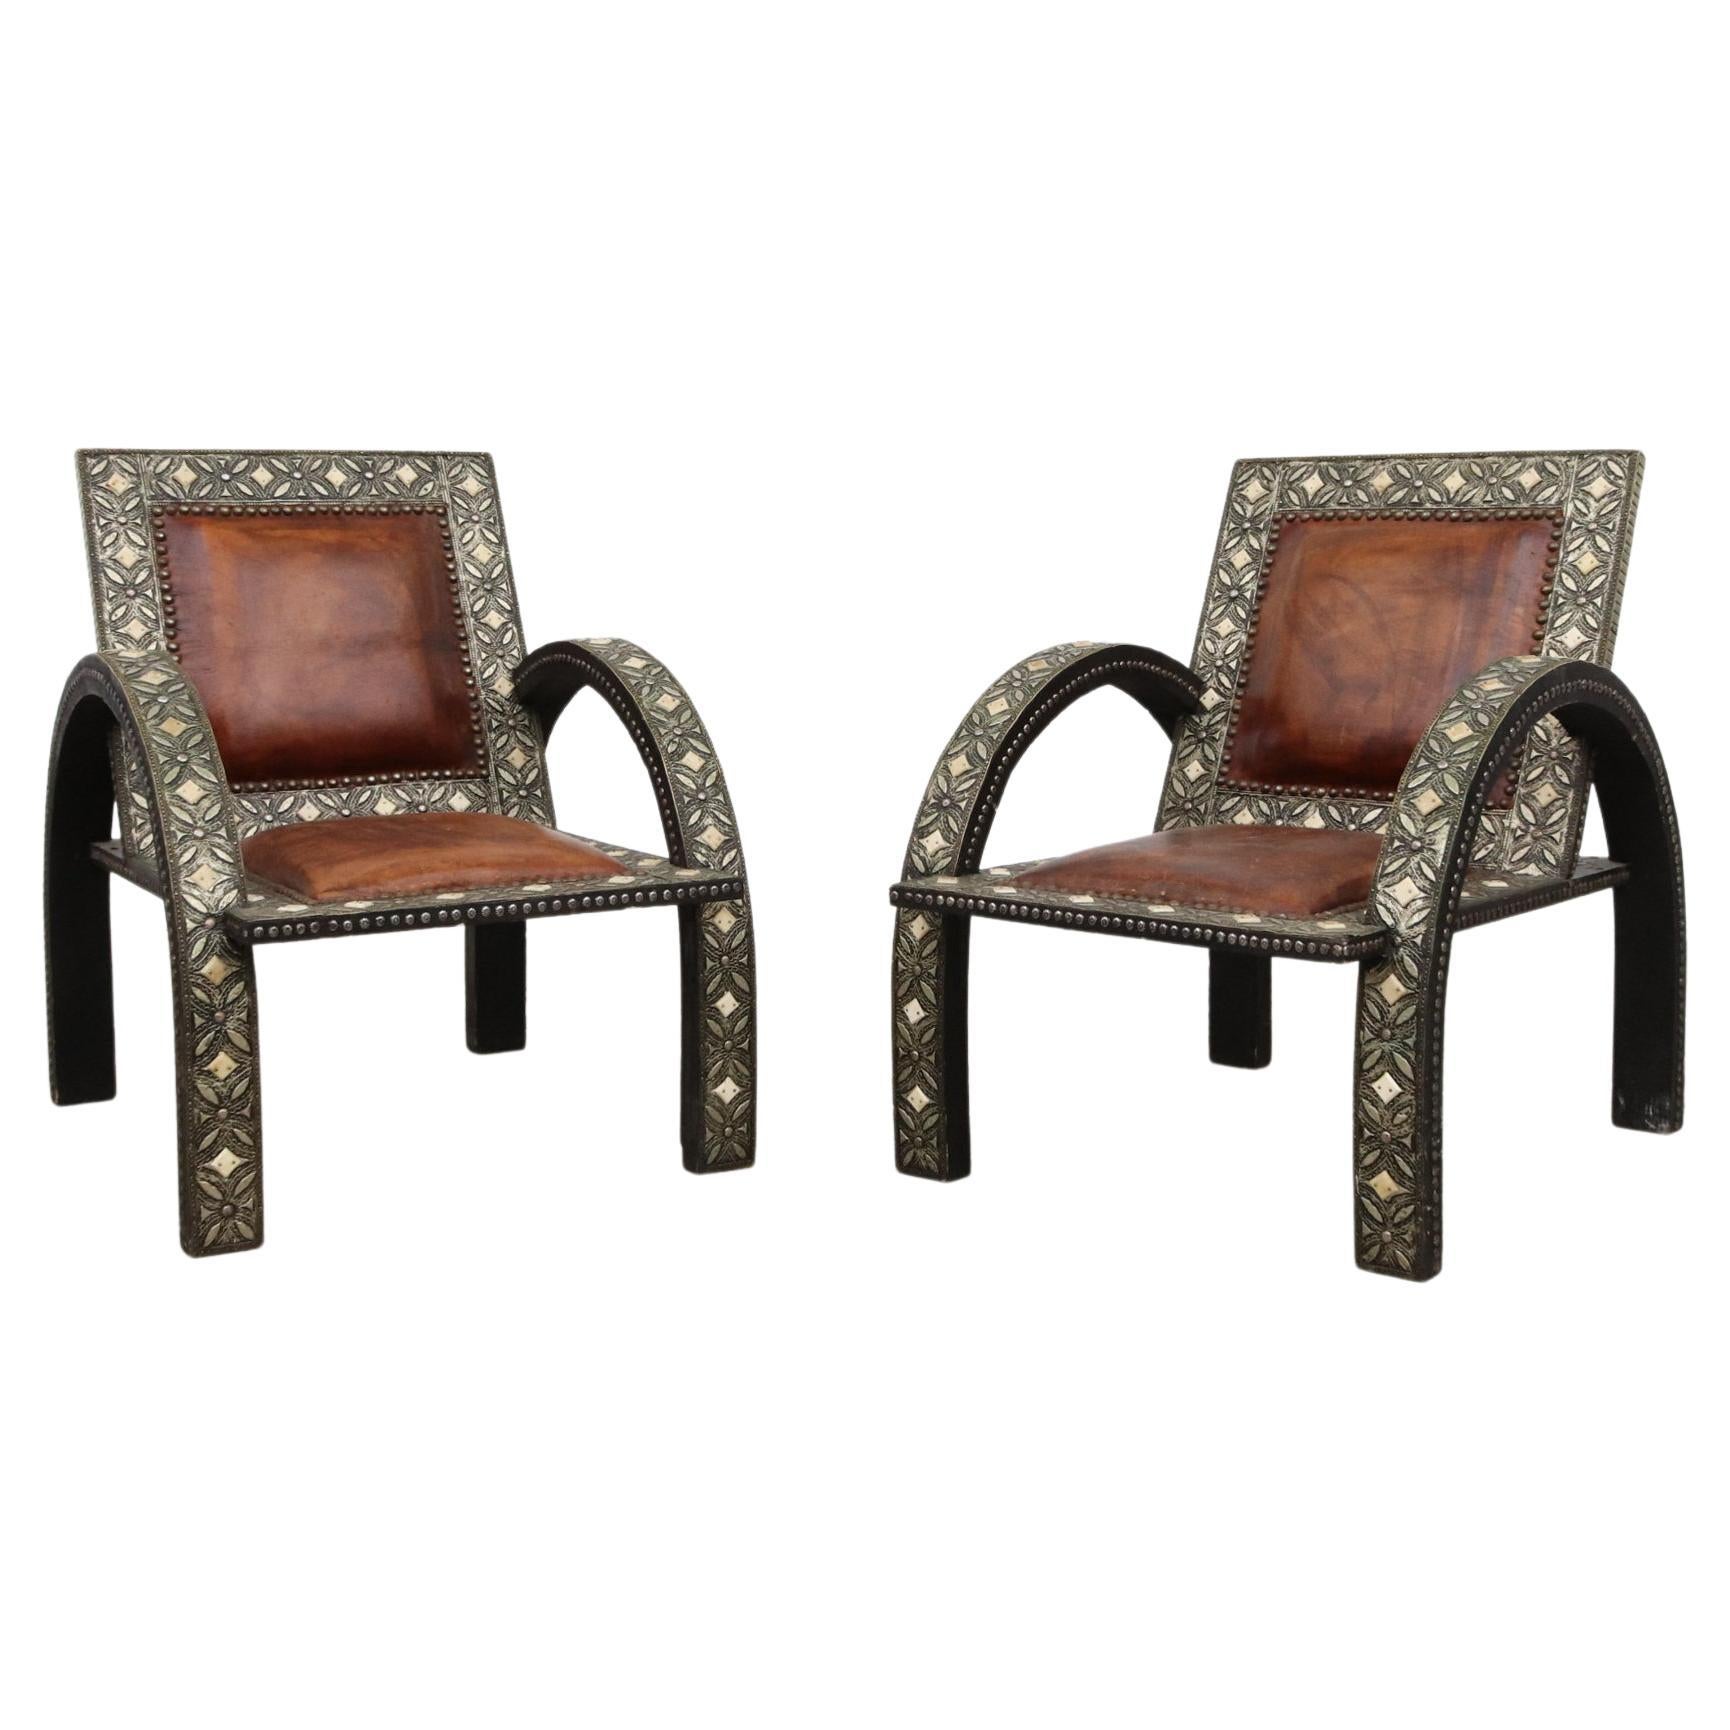 Pair of Moroccan Inlay Lounge Chairs